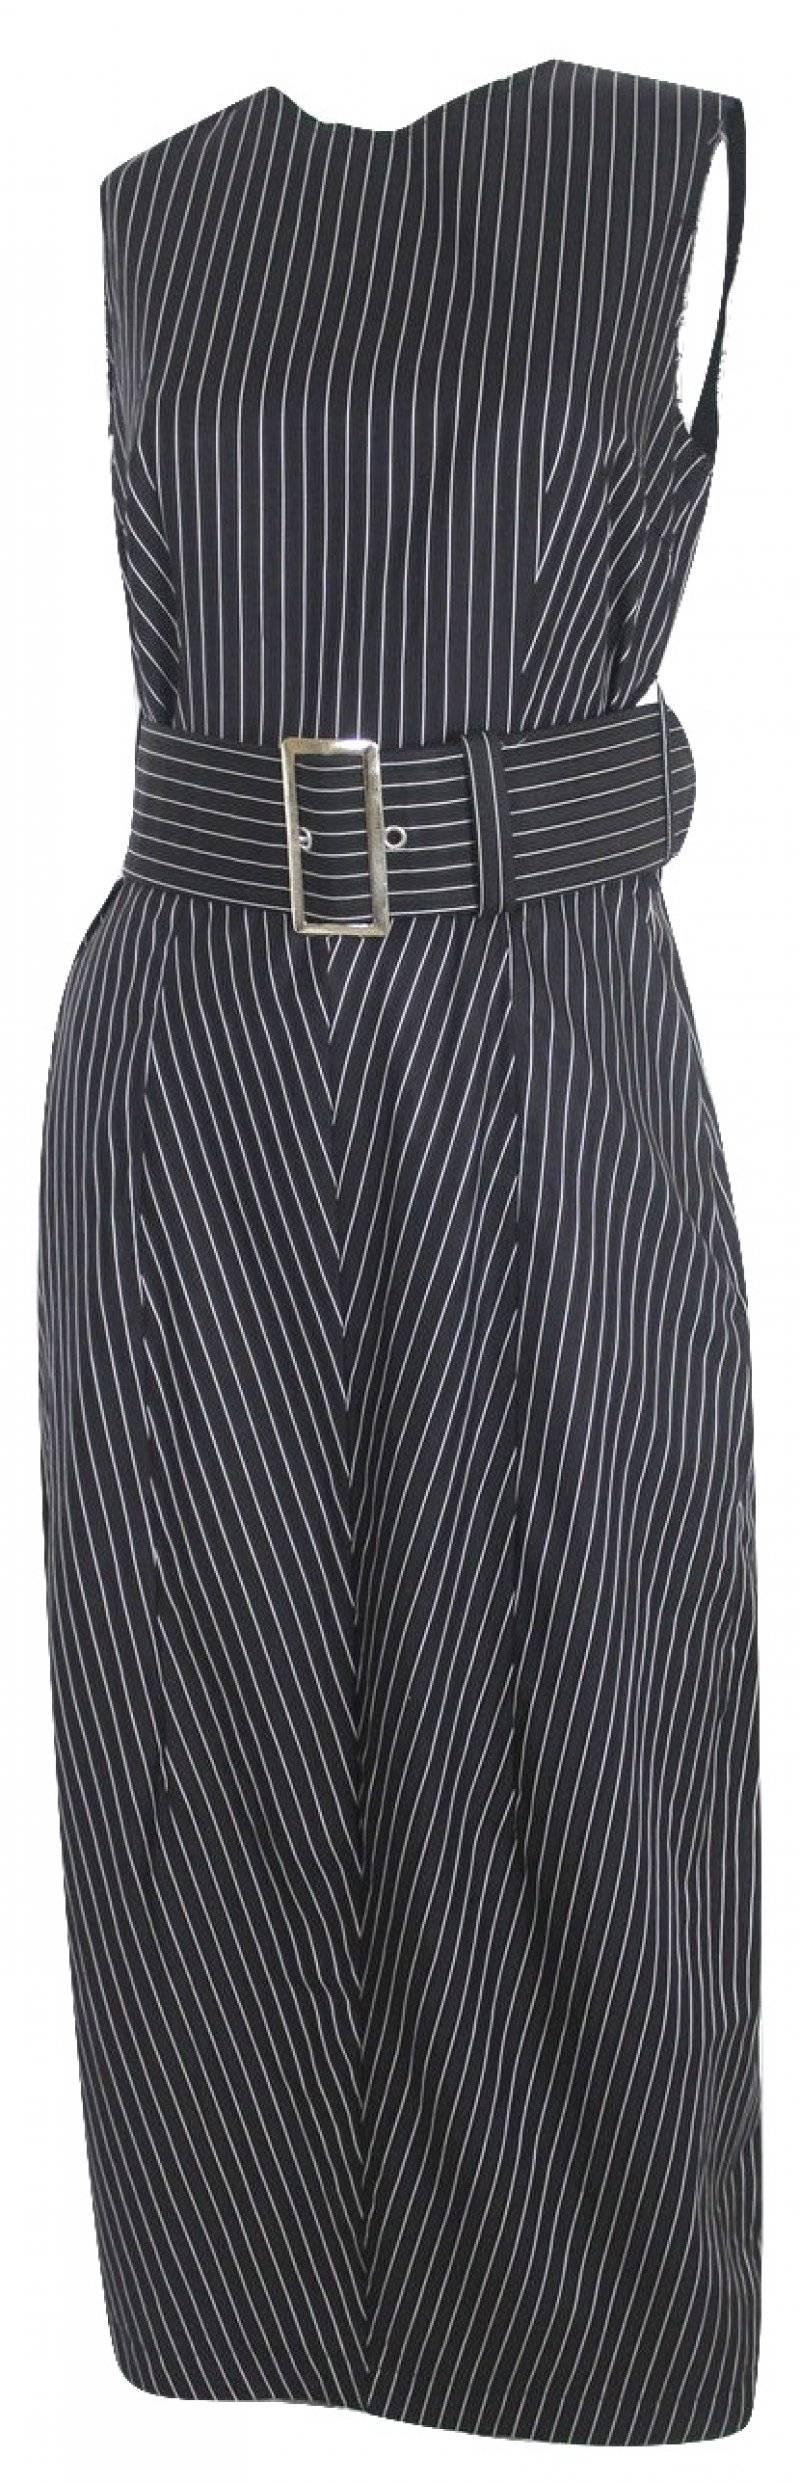 Comme des Garcons 2010 Collection Runway Pinstripe Dress 4